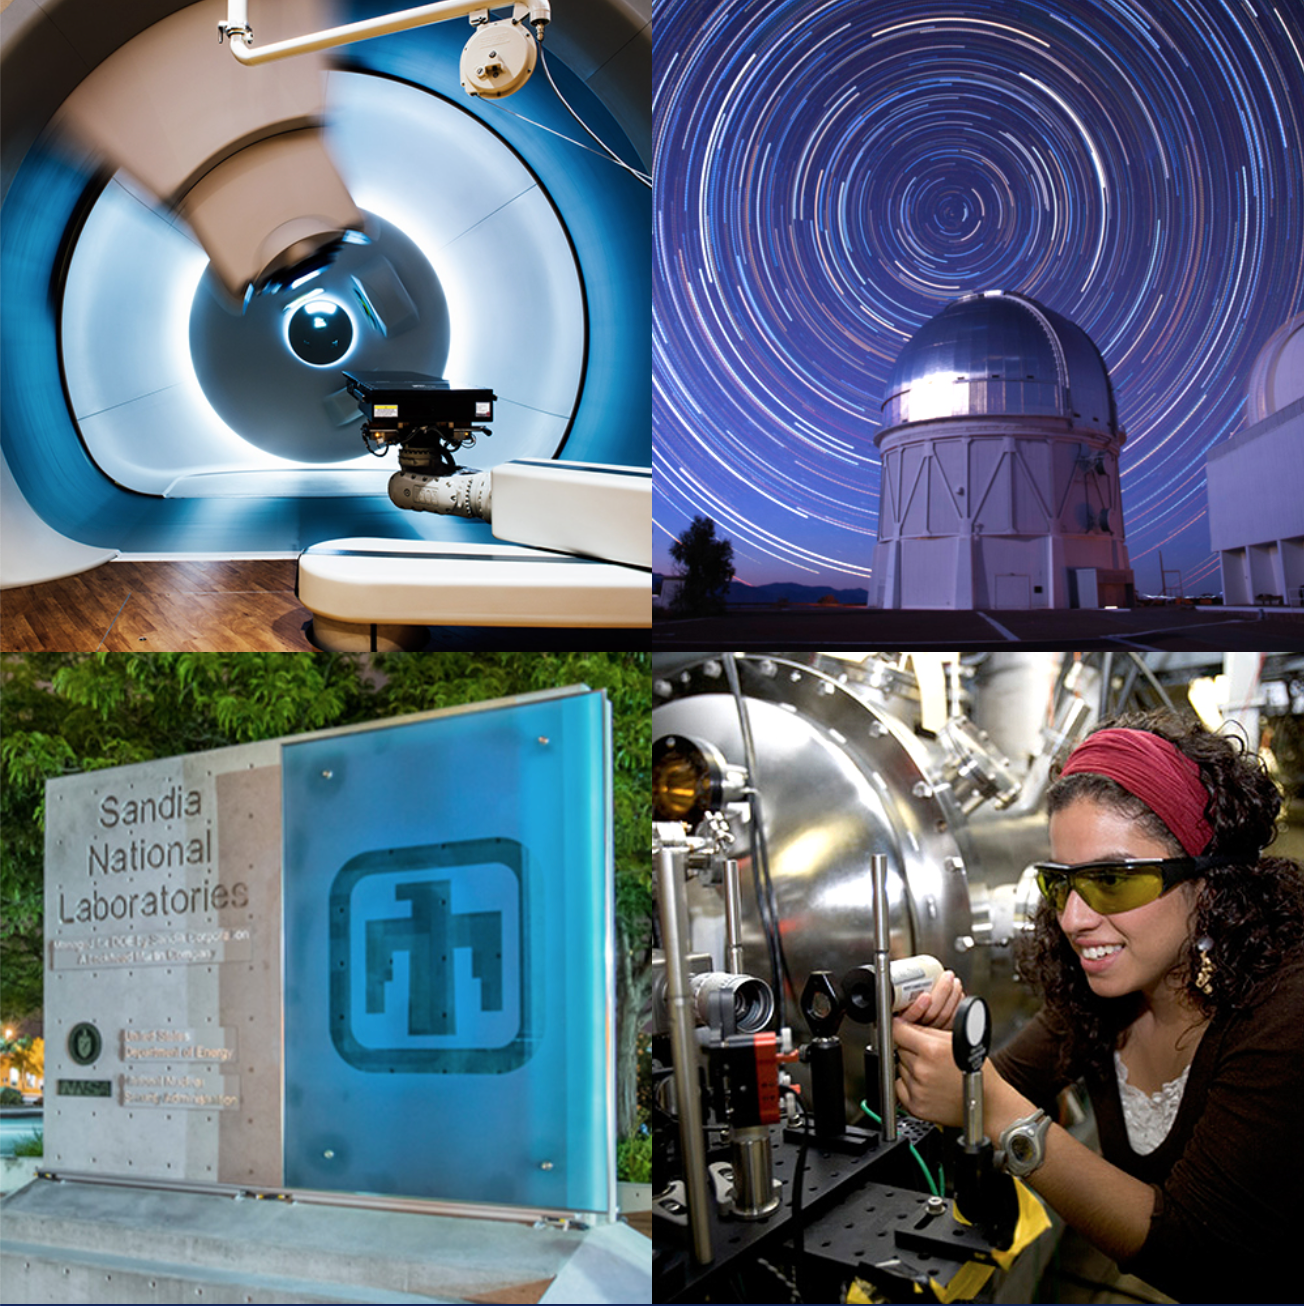 The Universities Research Association invites graduate students to apply for a new fellowship program aimed at providing research experience in science, technology, and engineering areas that support the seven Research Foundations of Sandia National Labor